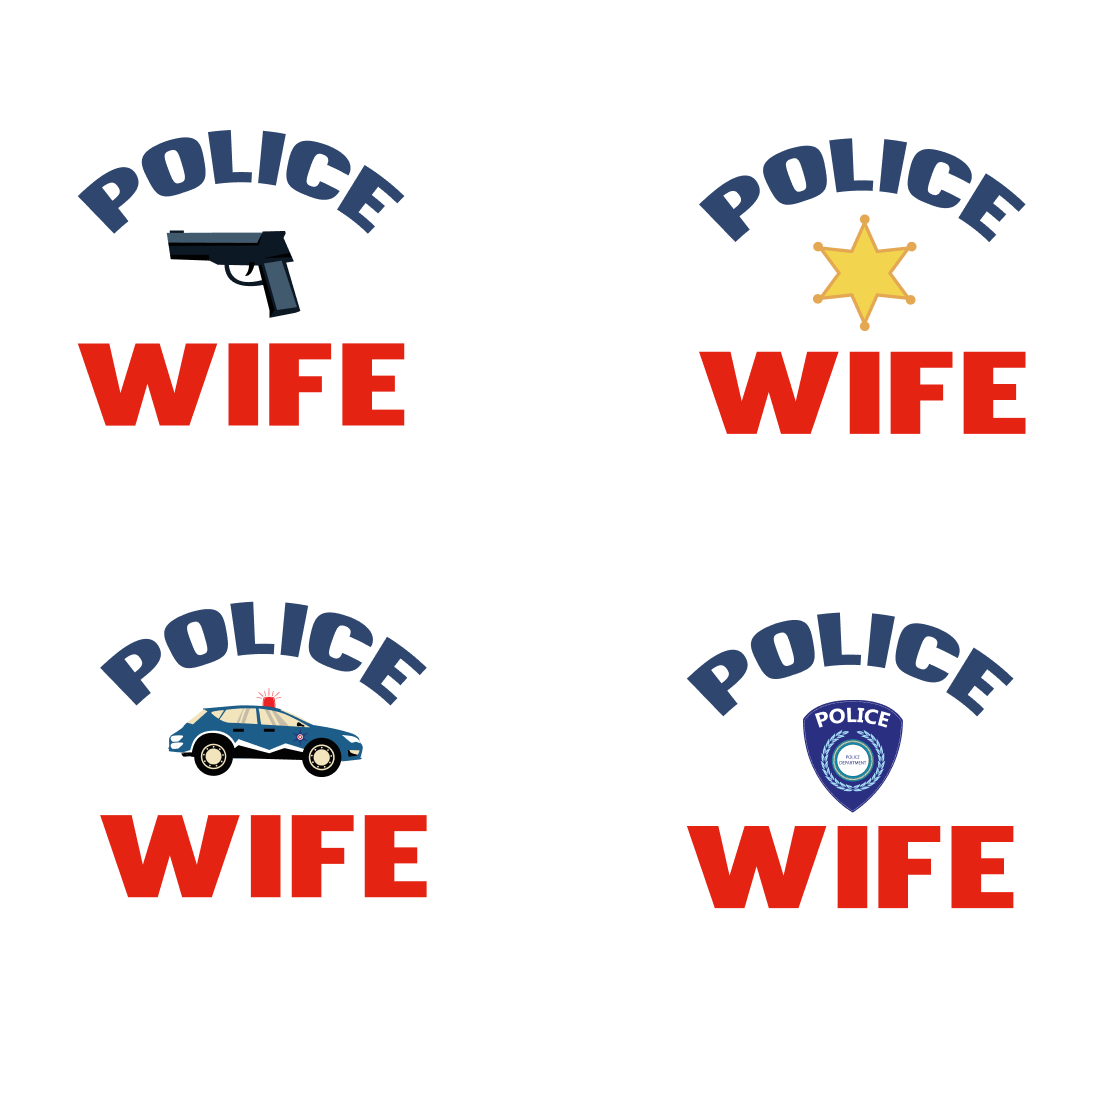 Police Wife SVG cover.